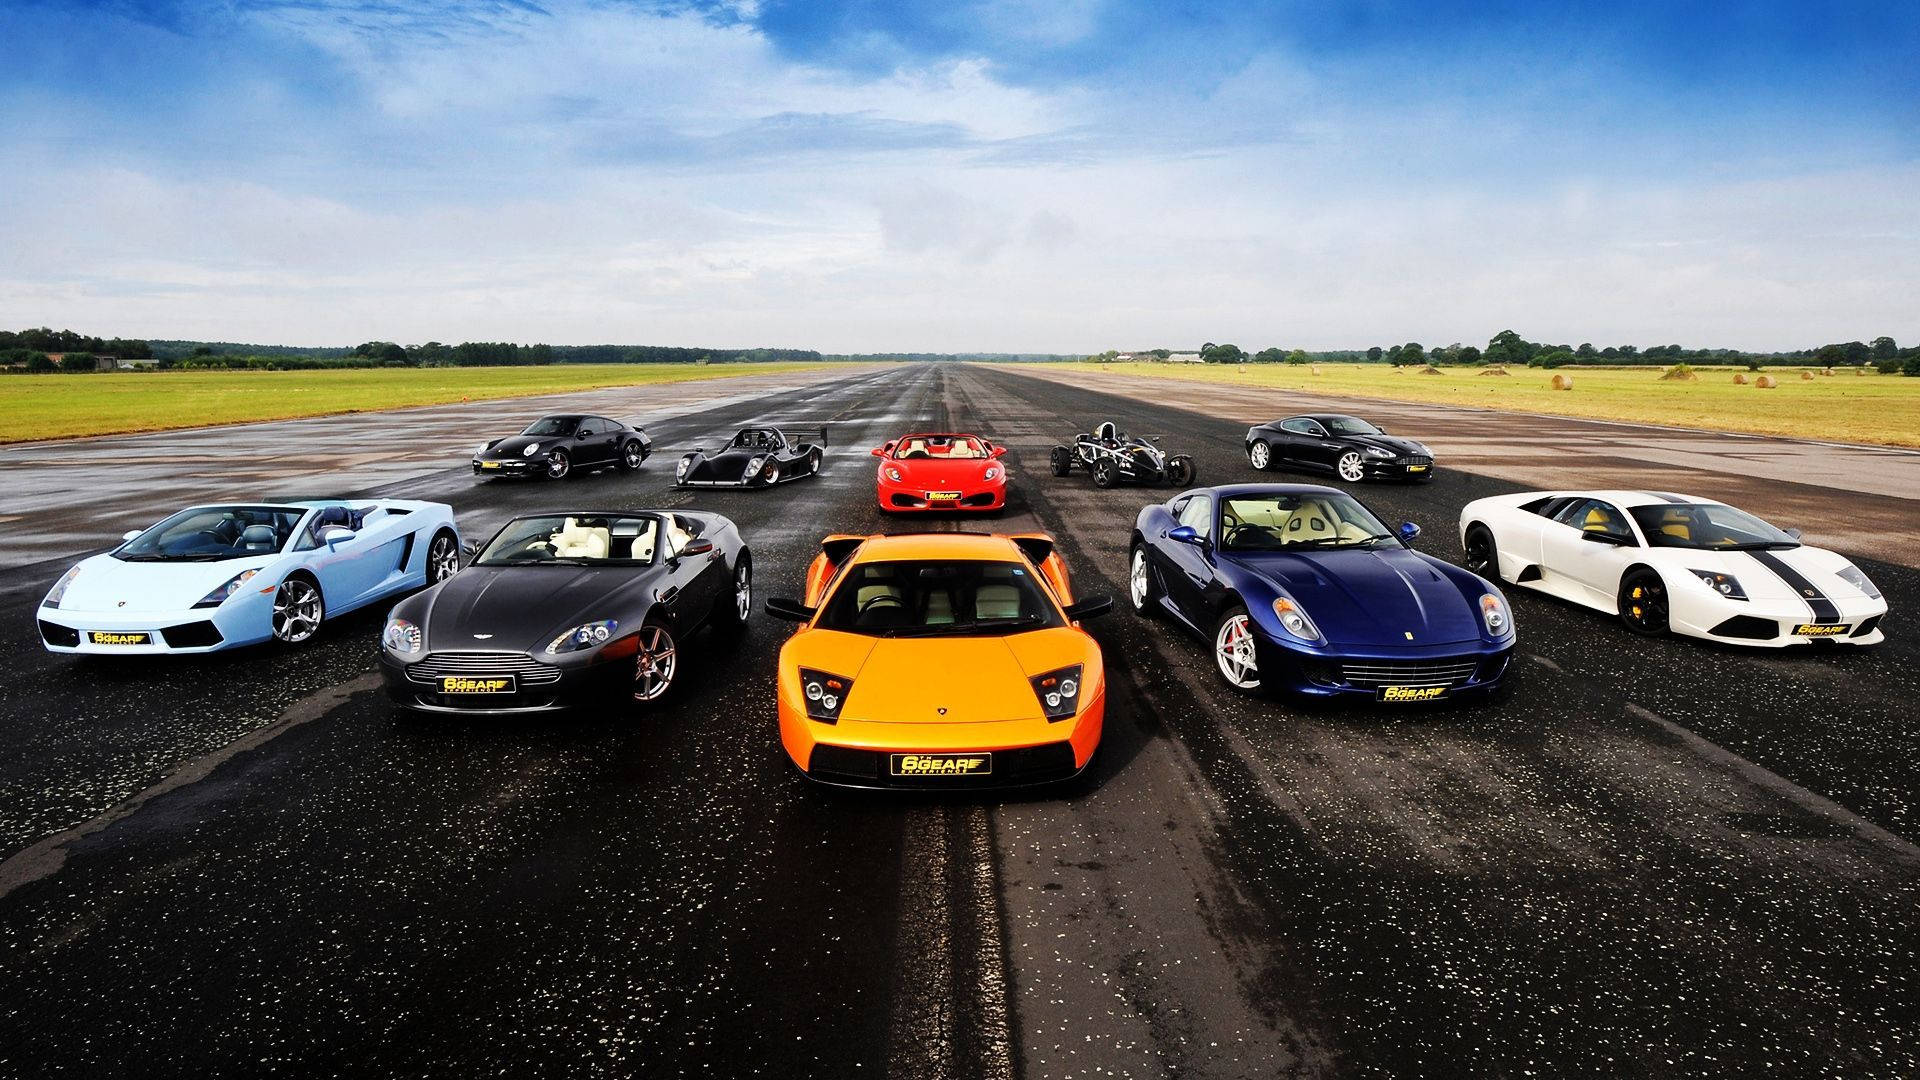 Widescreen super cars in rows wallpaper.